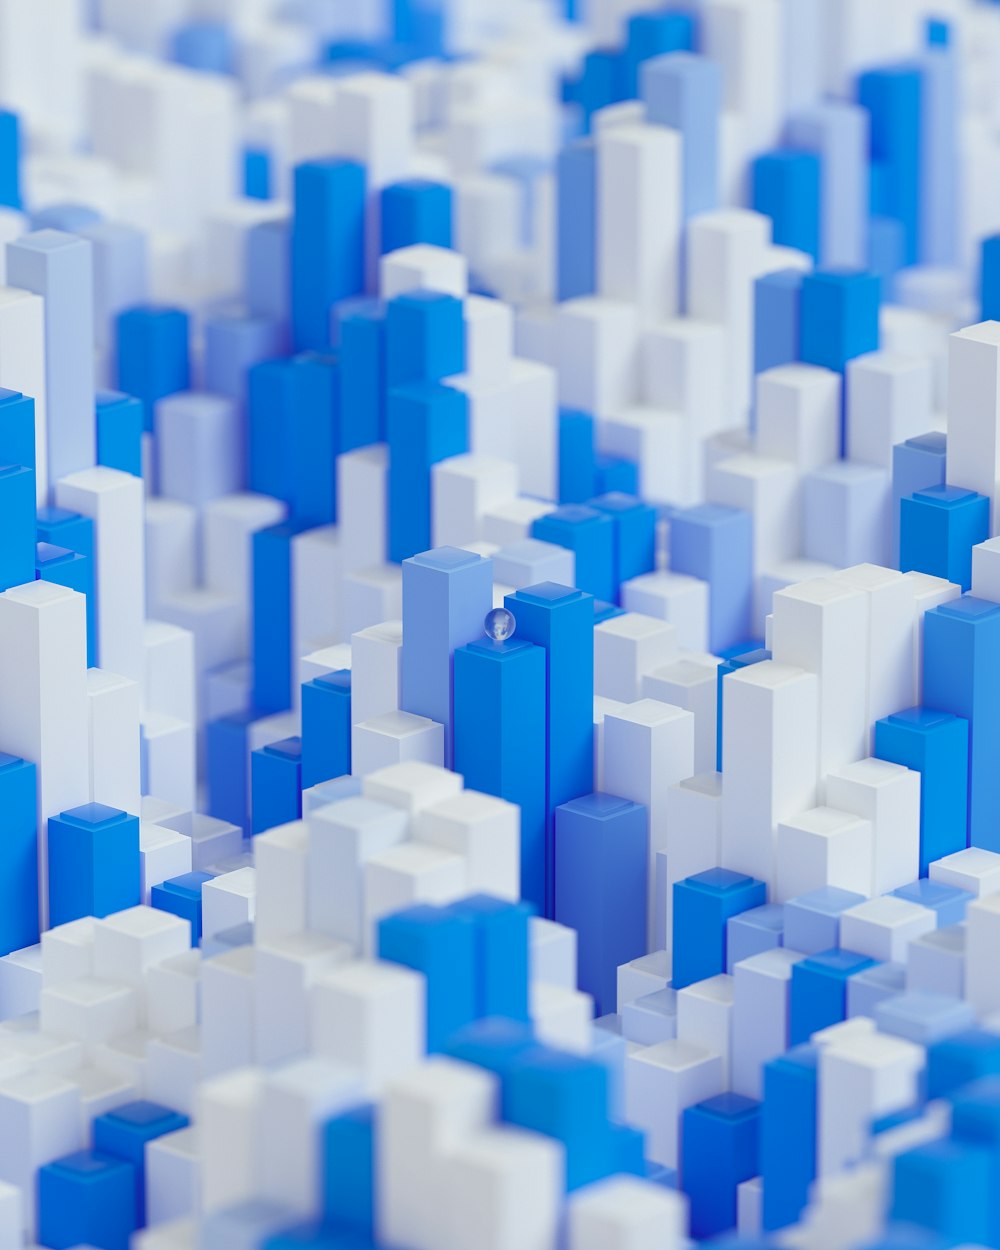 a close up of a blue and white pattern of cubes